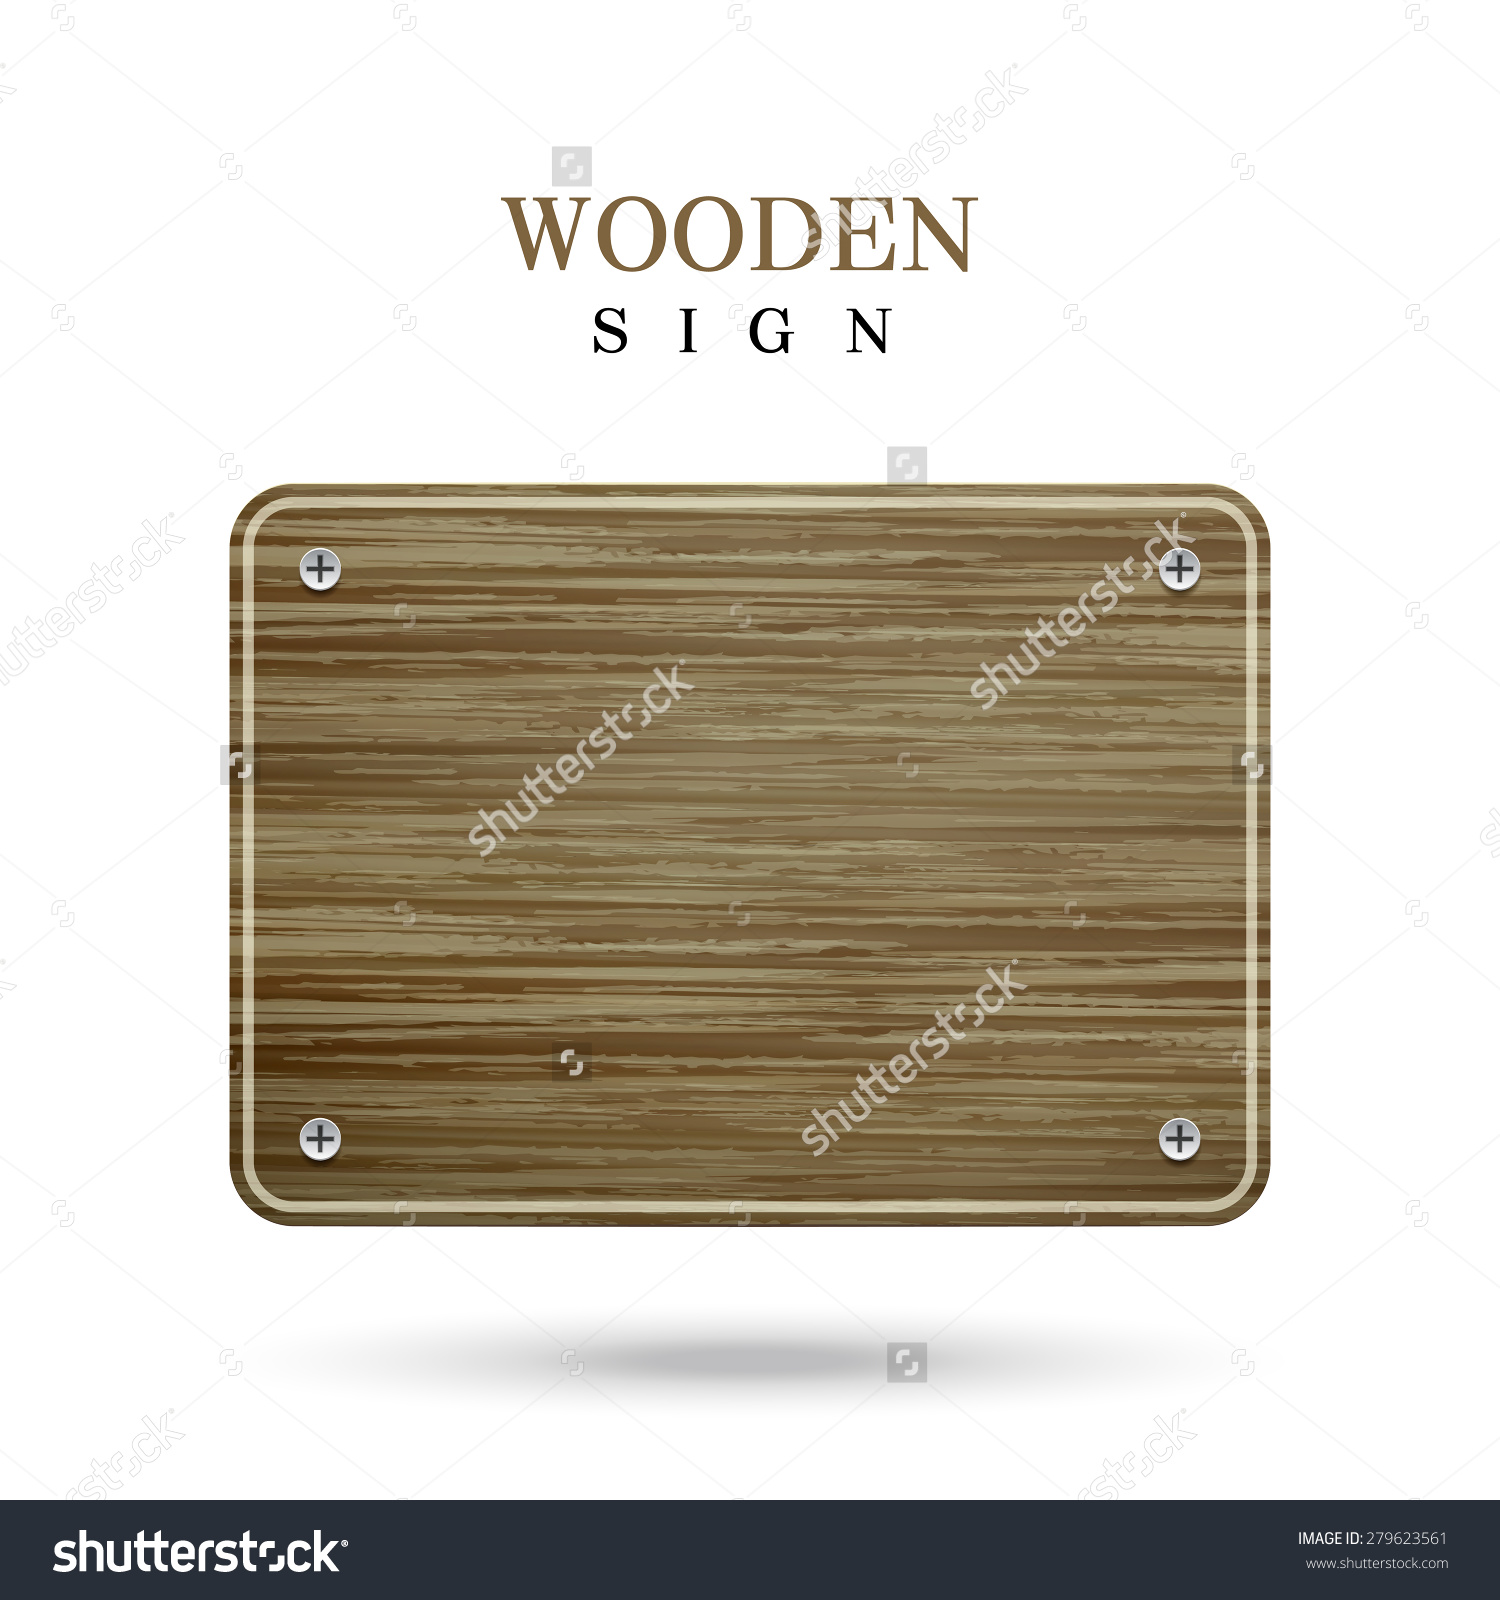 Blank Wooden Sign Isolated On White Background Stock Vector 279623561